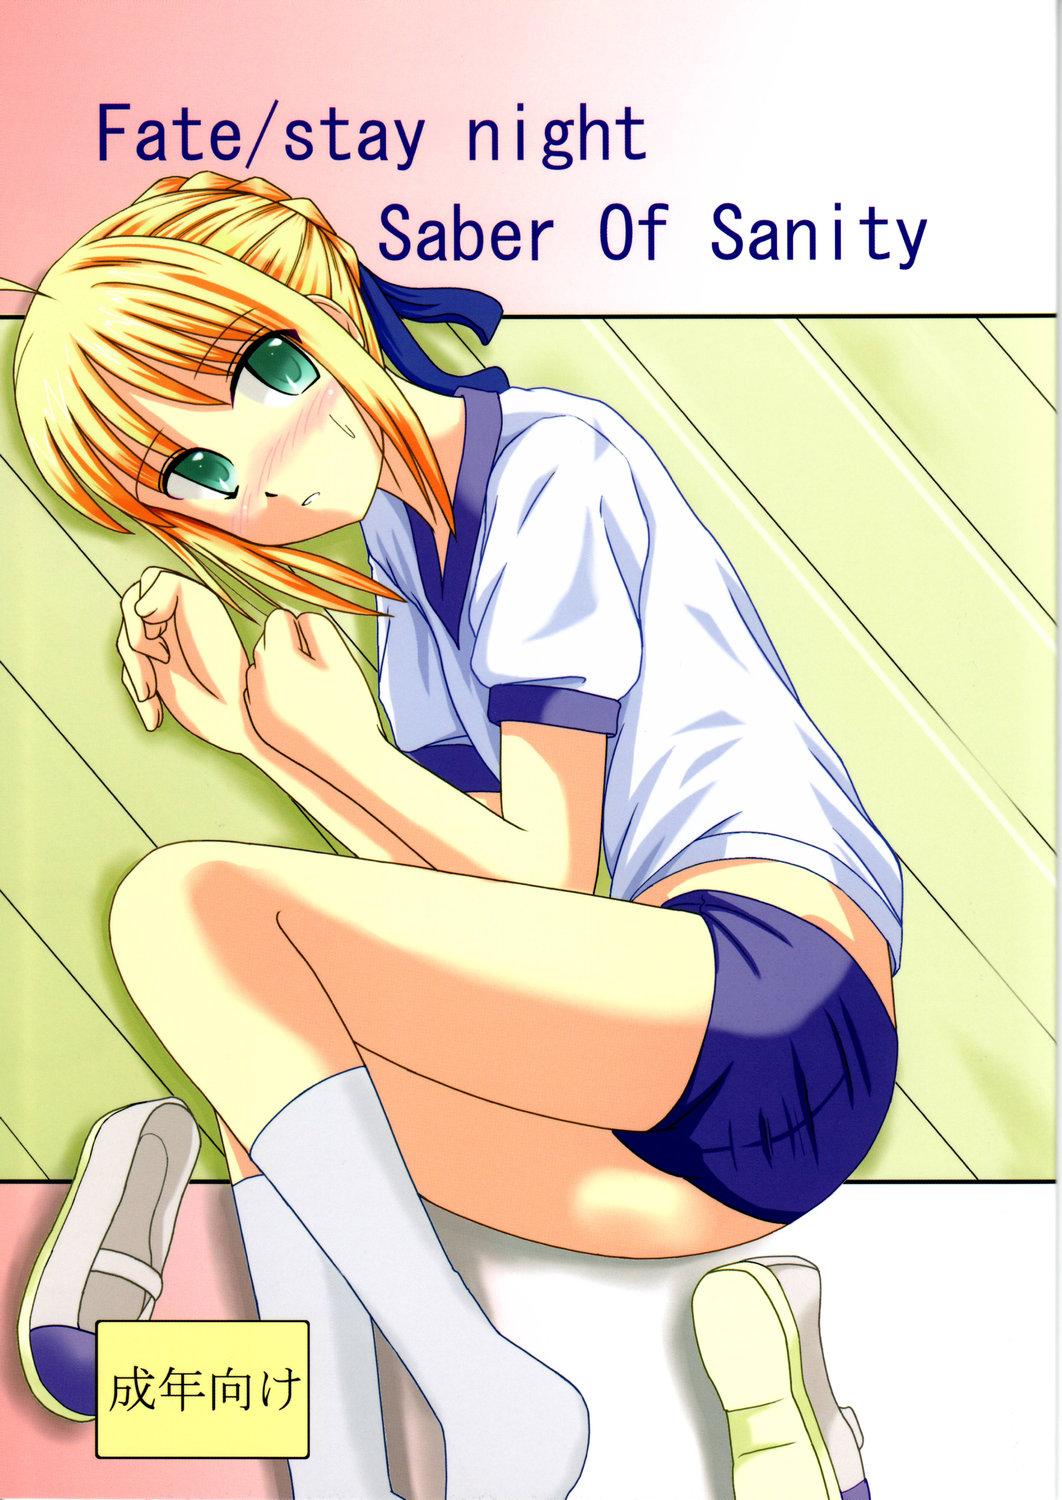 Blonde Saber Of Sanity - Fate stay night Puba - Page 1